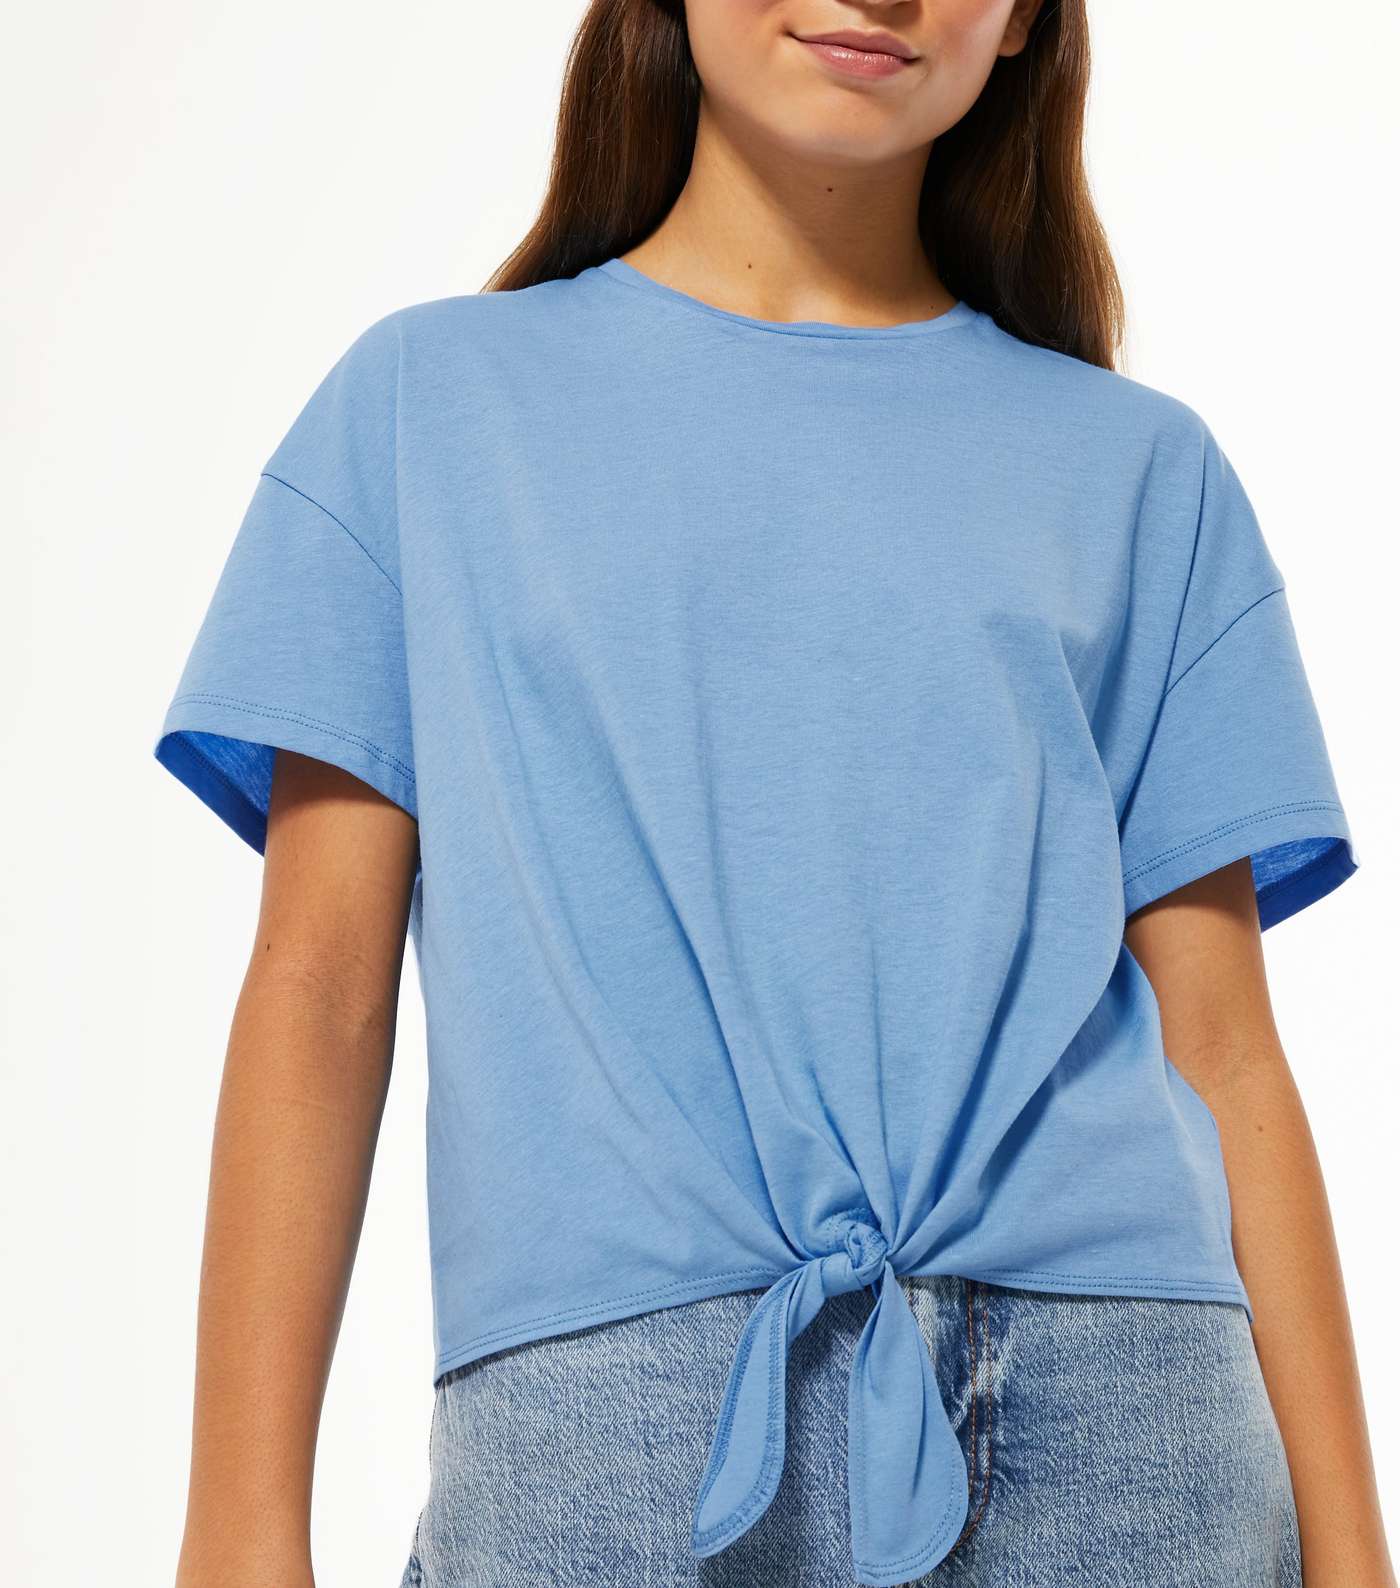 Girls Bright Blue Tie Front T-Shirt Image 4